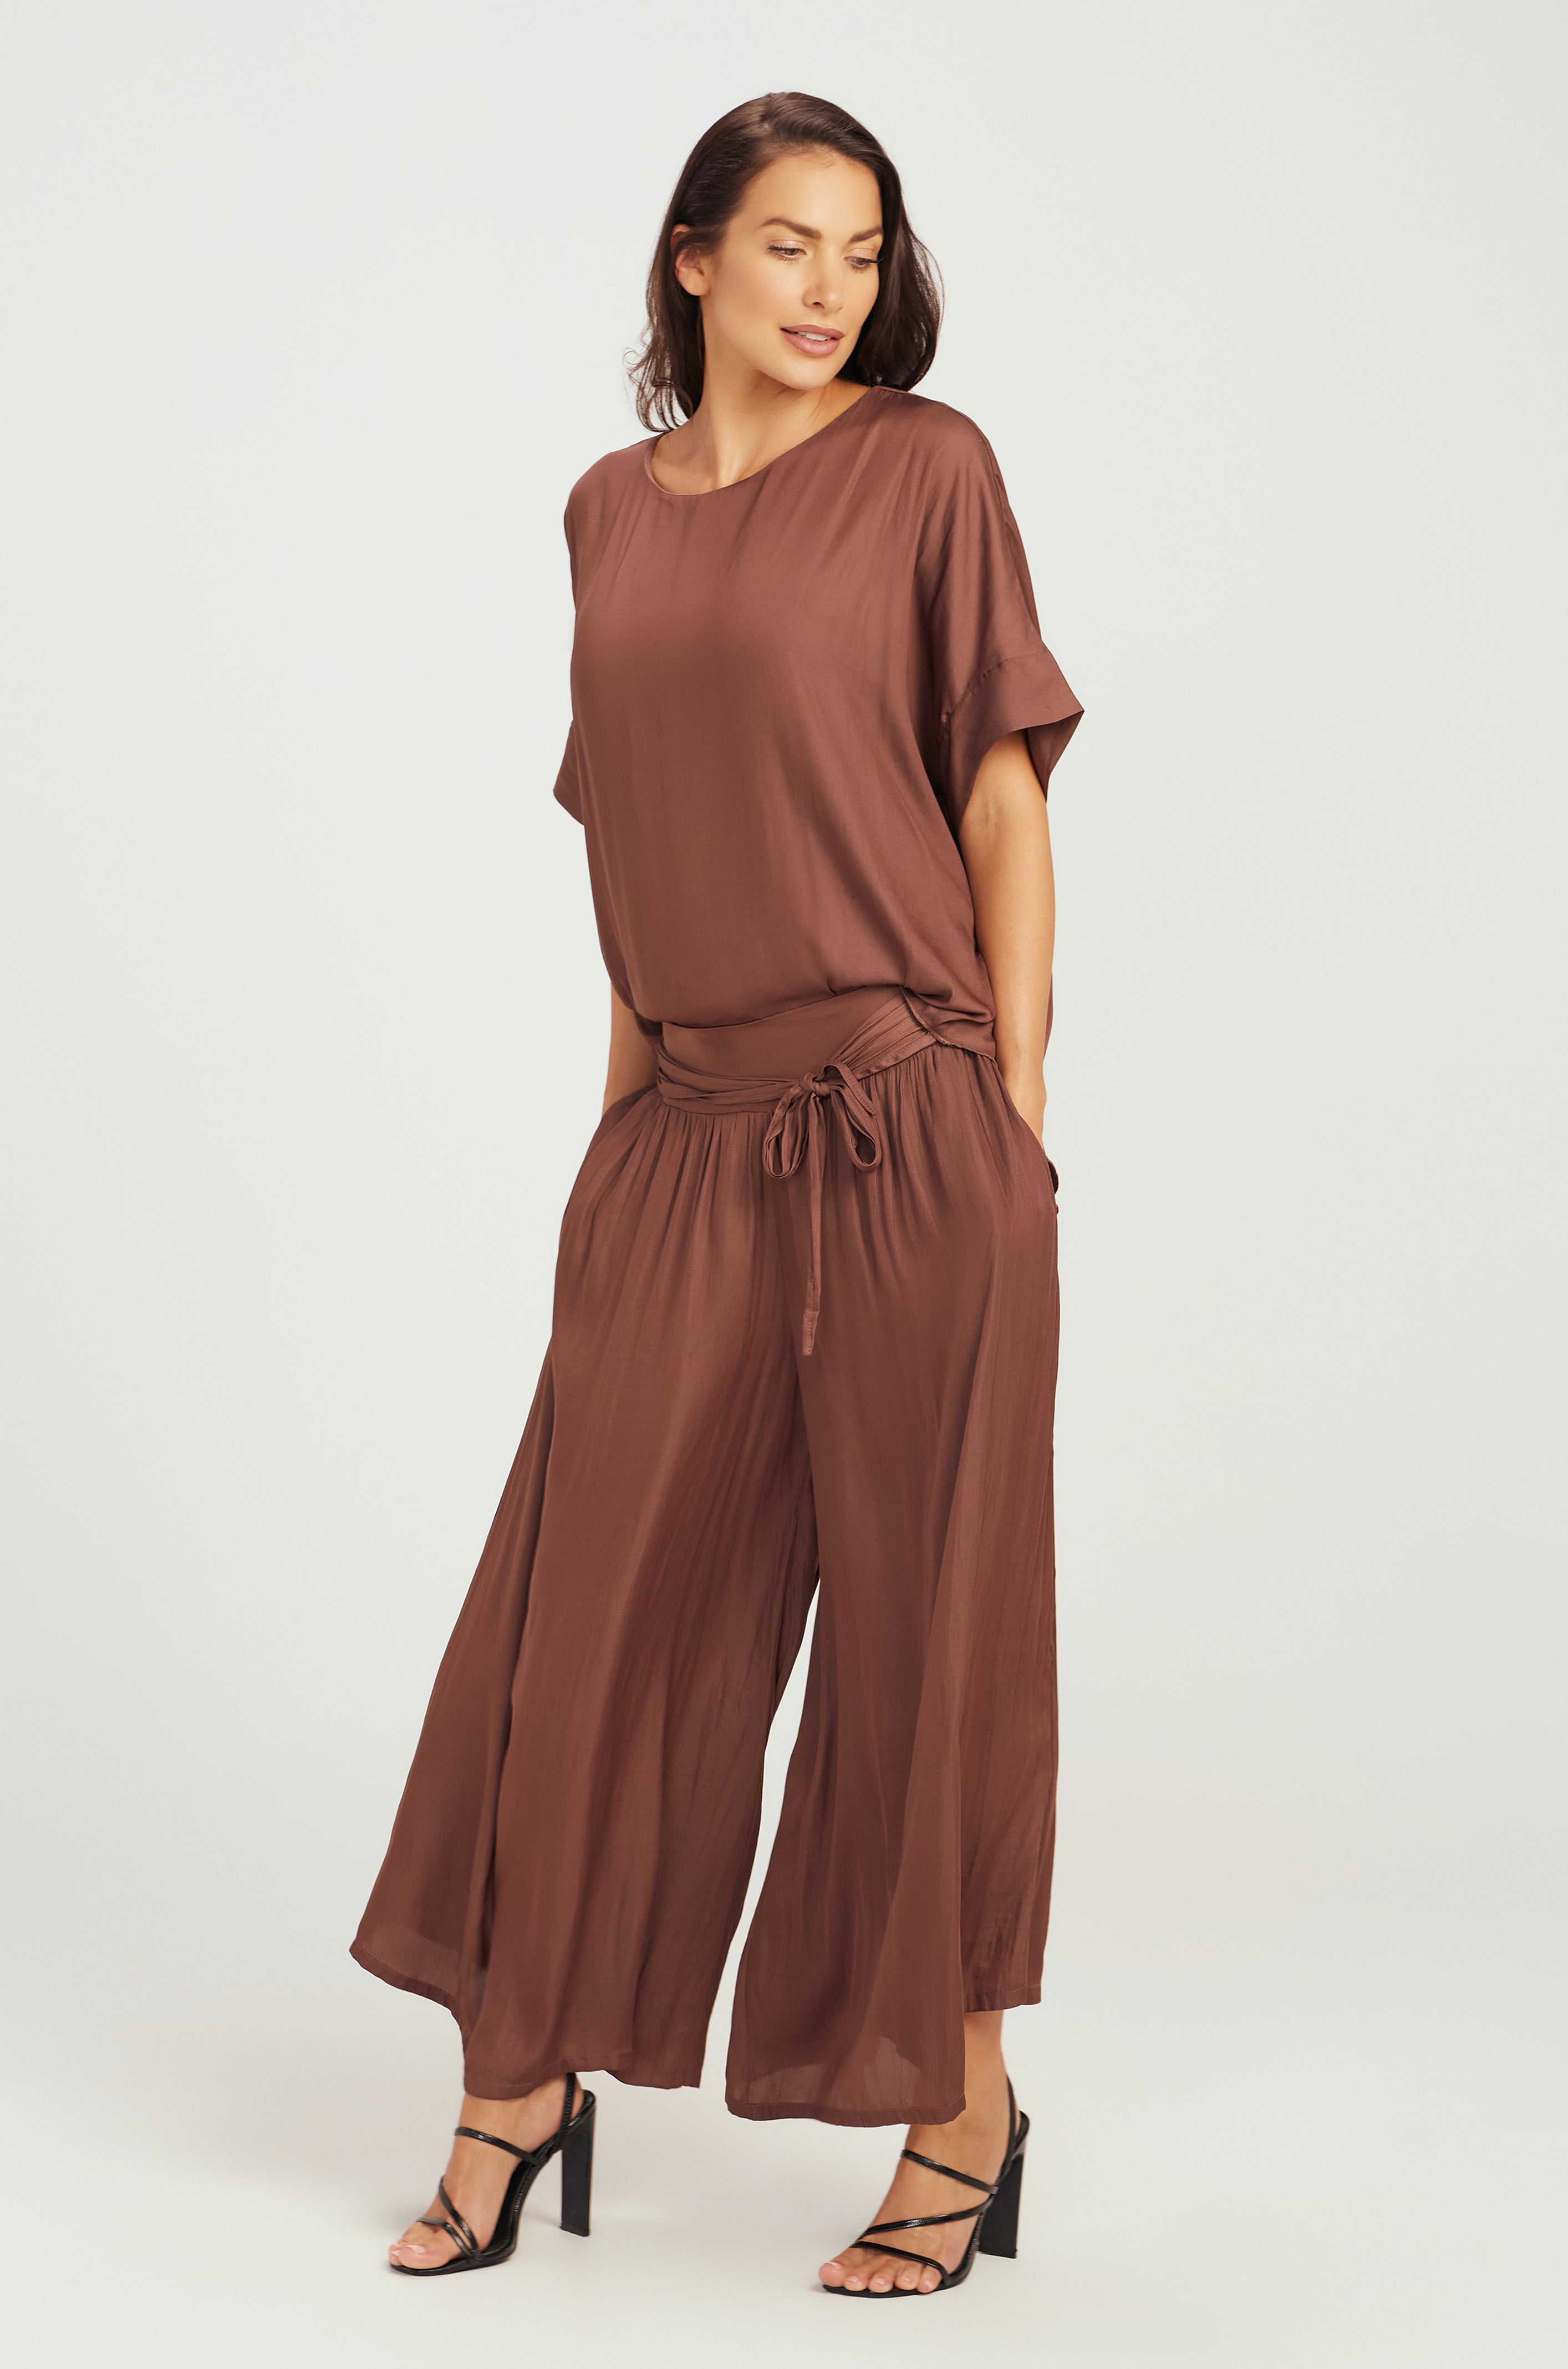 TOPS with attached tank / ROUND NECK - CHOCOLATE /PLUM